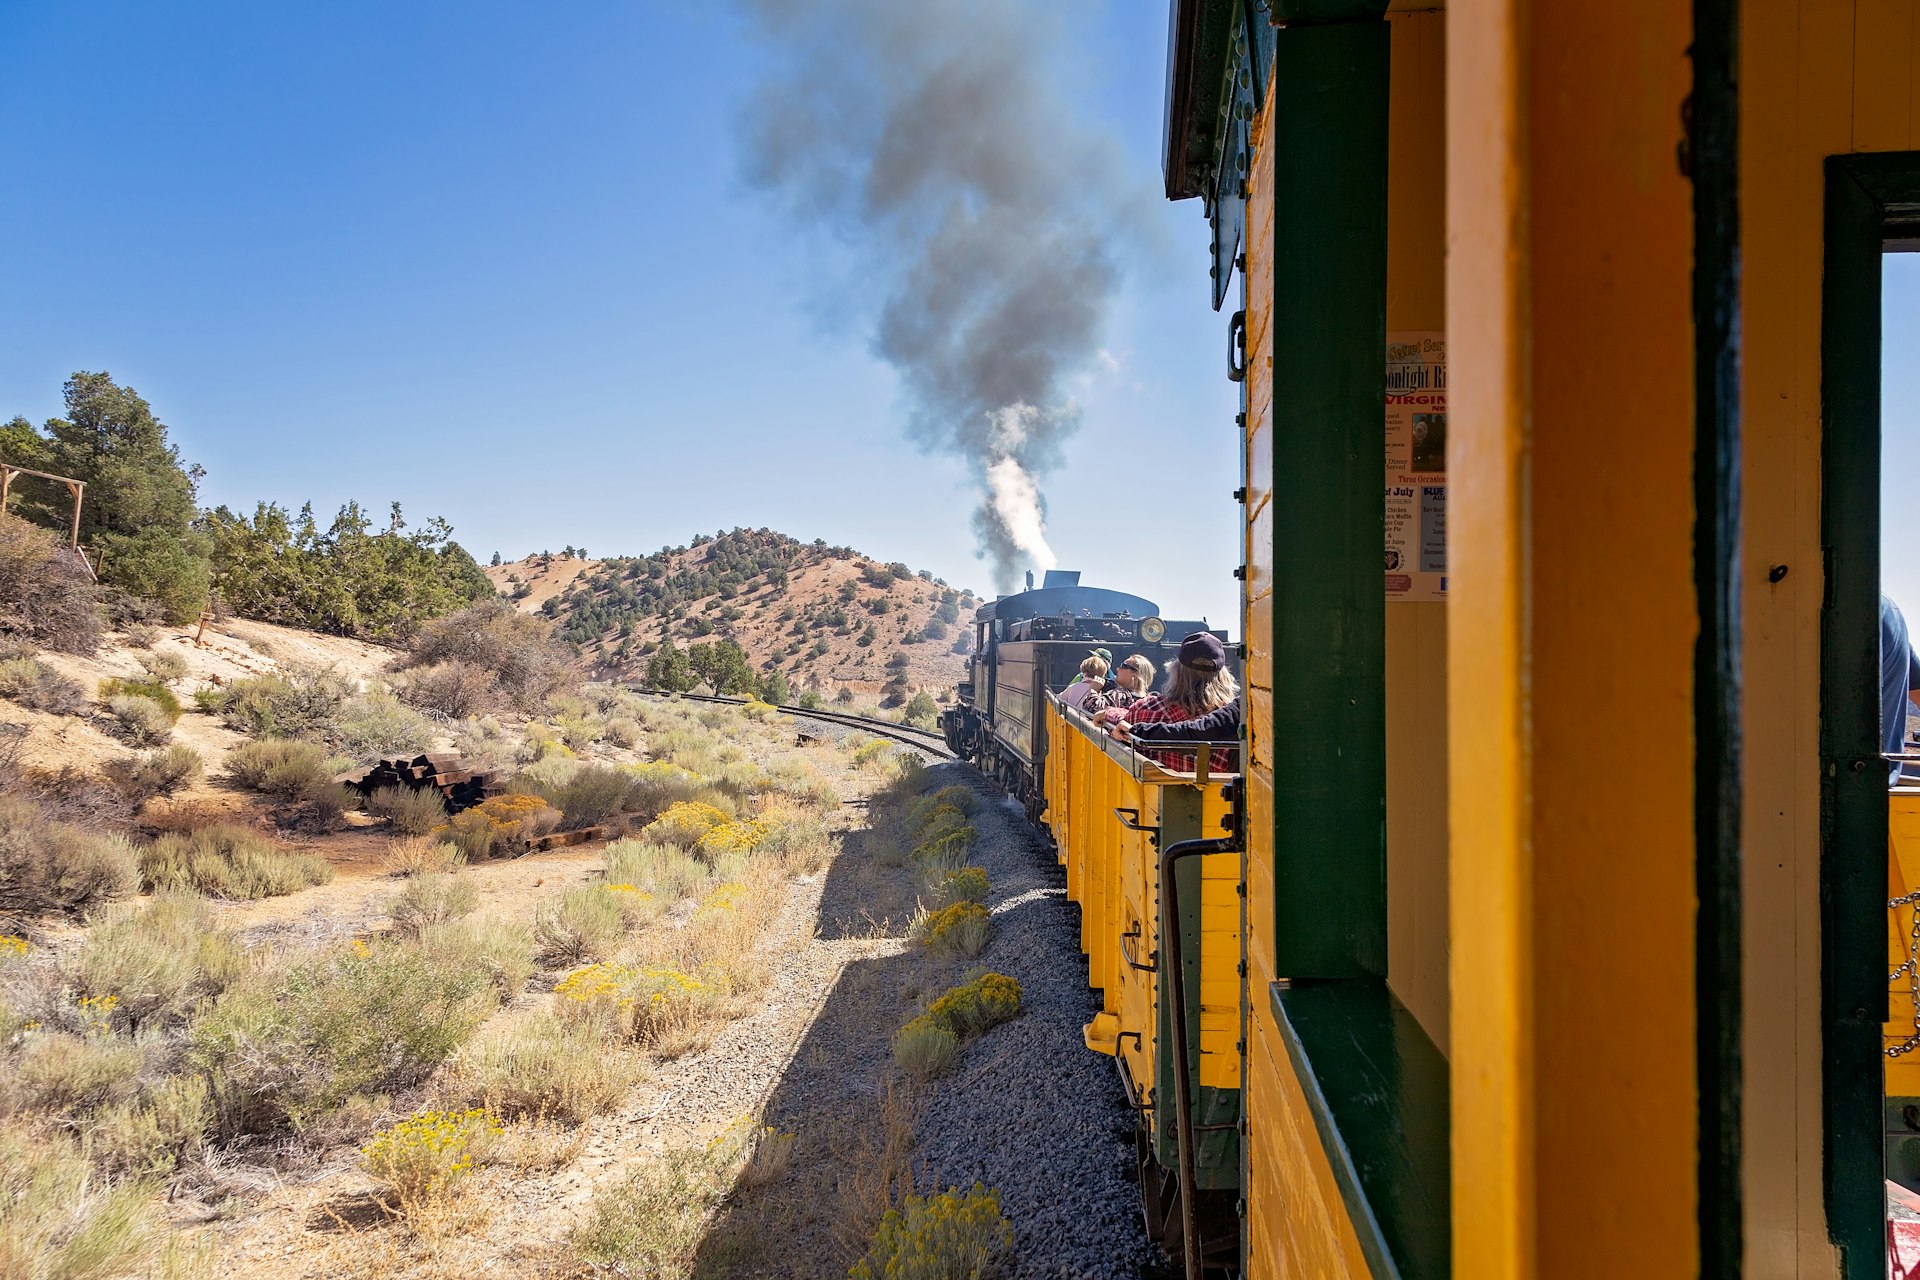 Passing through the Virginia City mines on top of a yellow steam locomotive